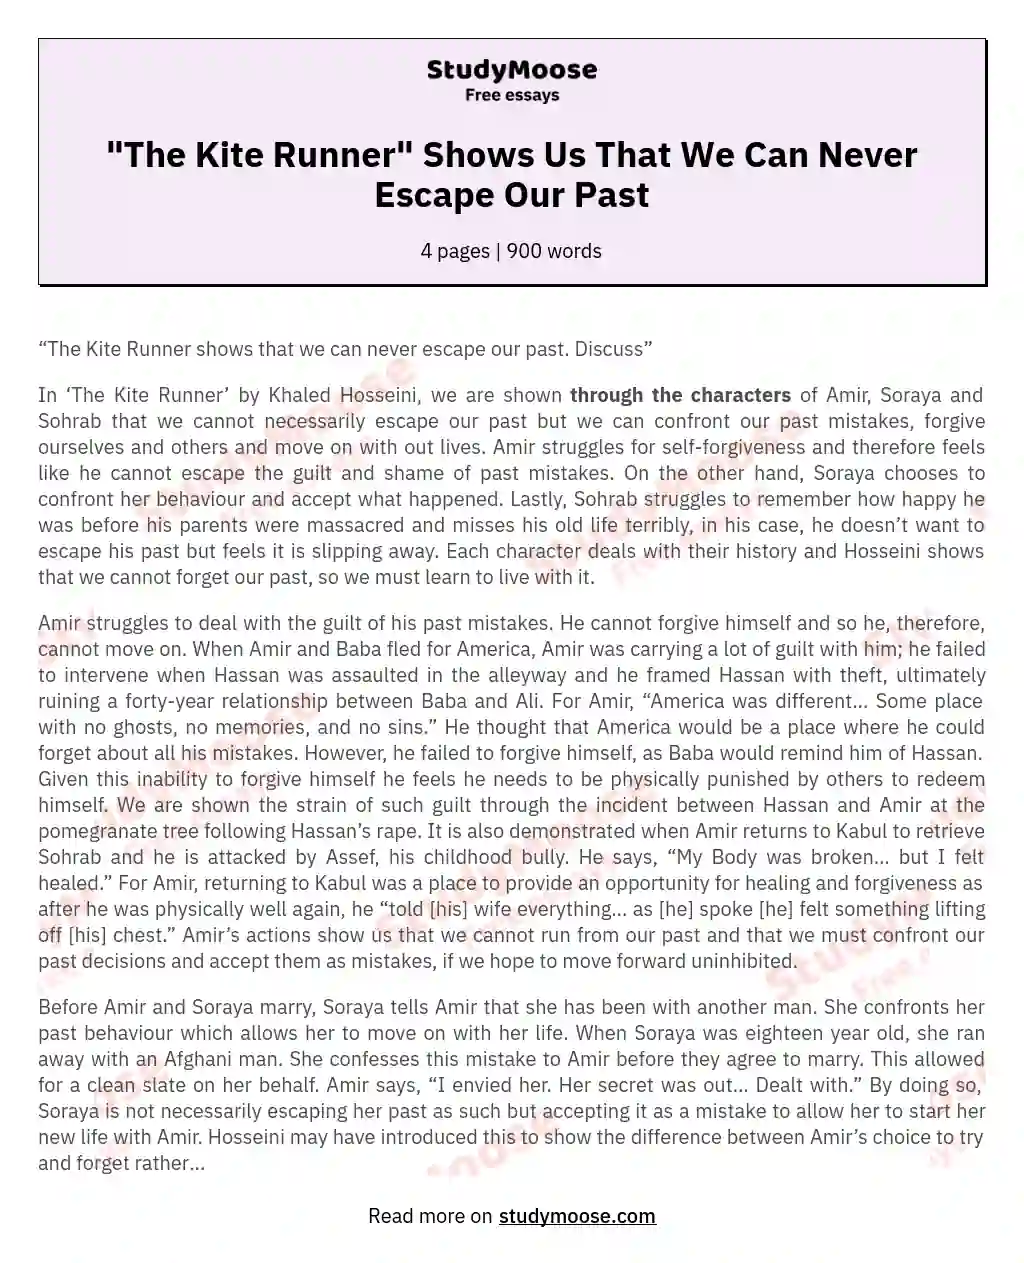 "The Kite Runner" Shows Us That We Can Never Escape Our Past